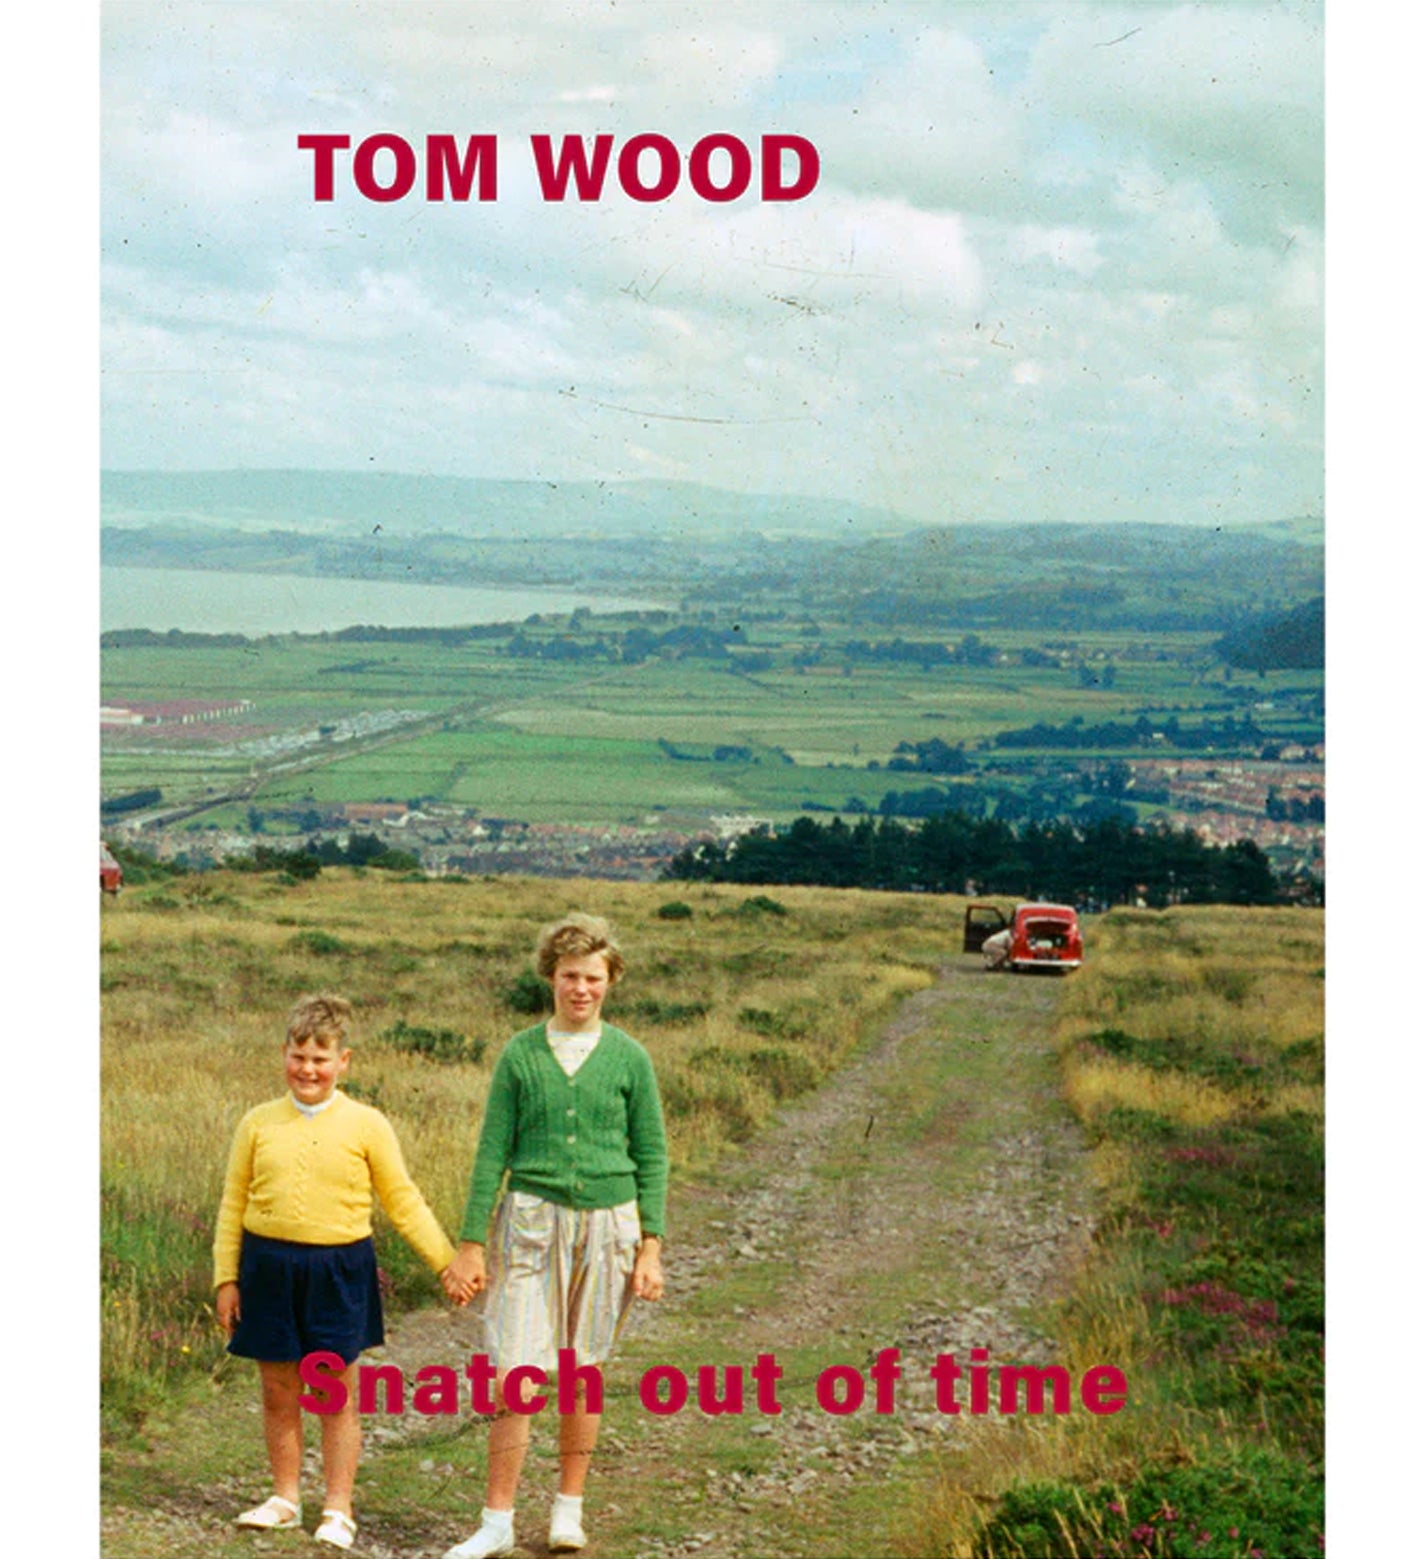 Tom Wood: Snatch out of time